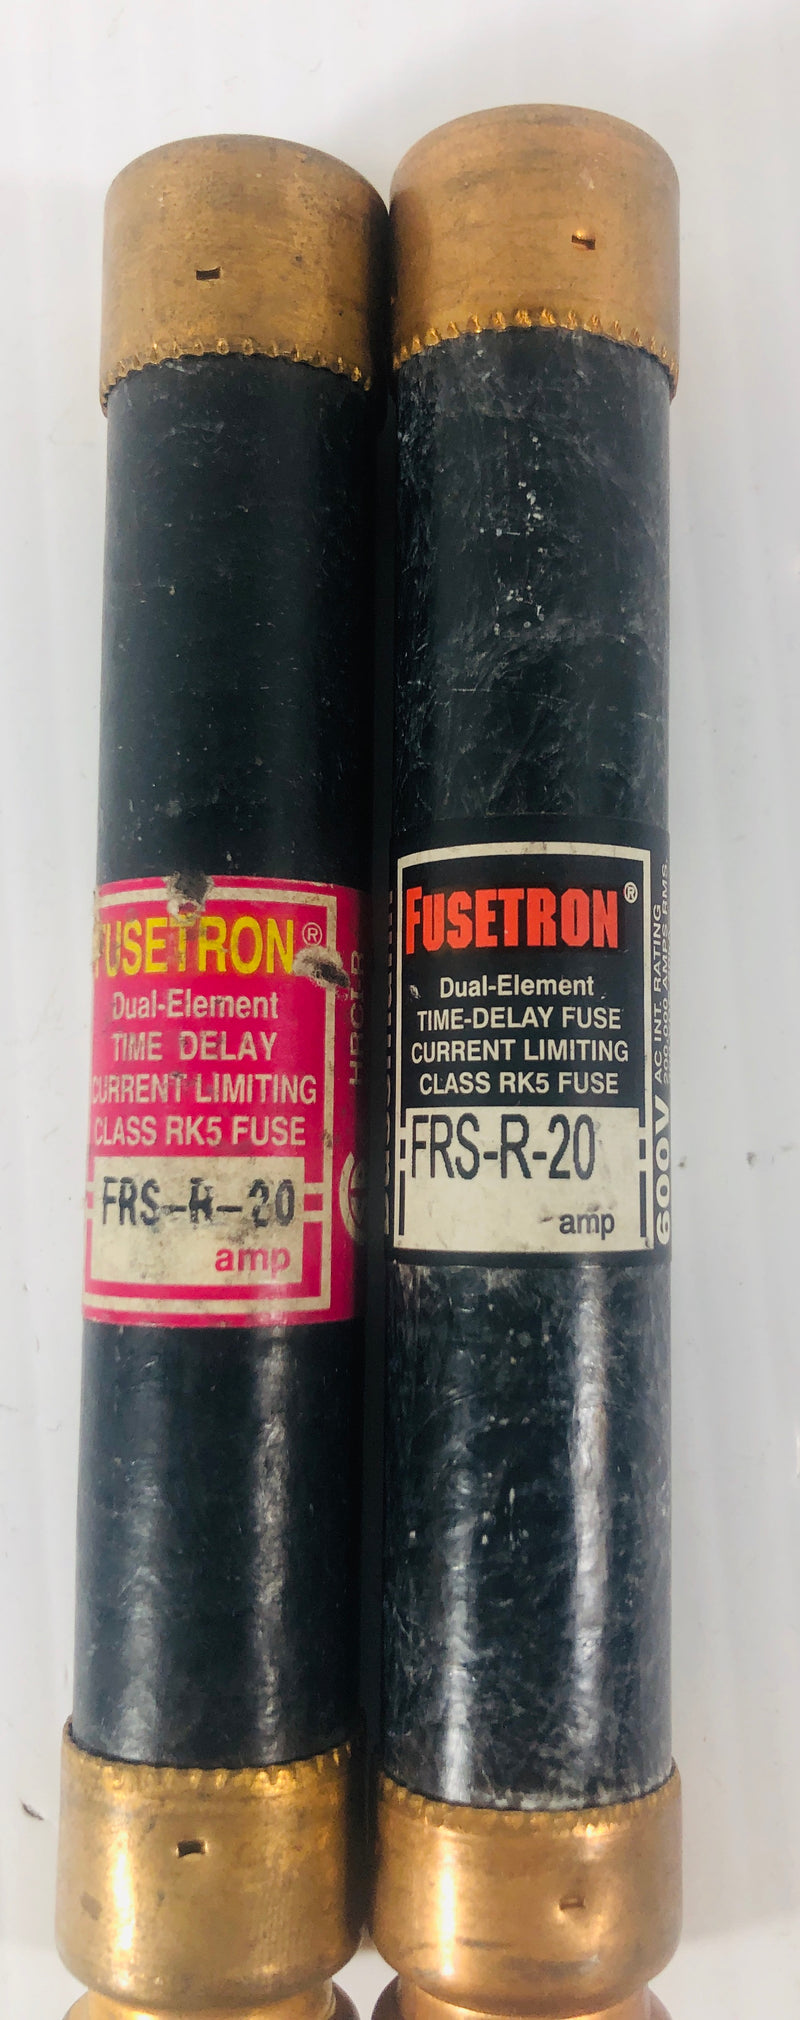 Fusetron Dual Element Fuse FRS-R-20 (Lot of 2)